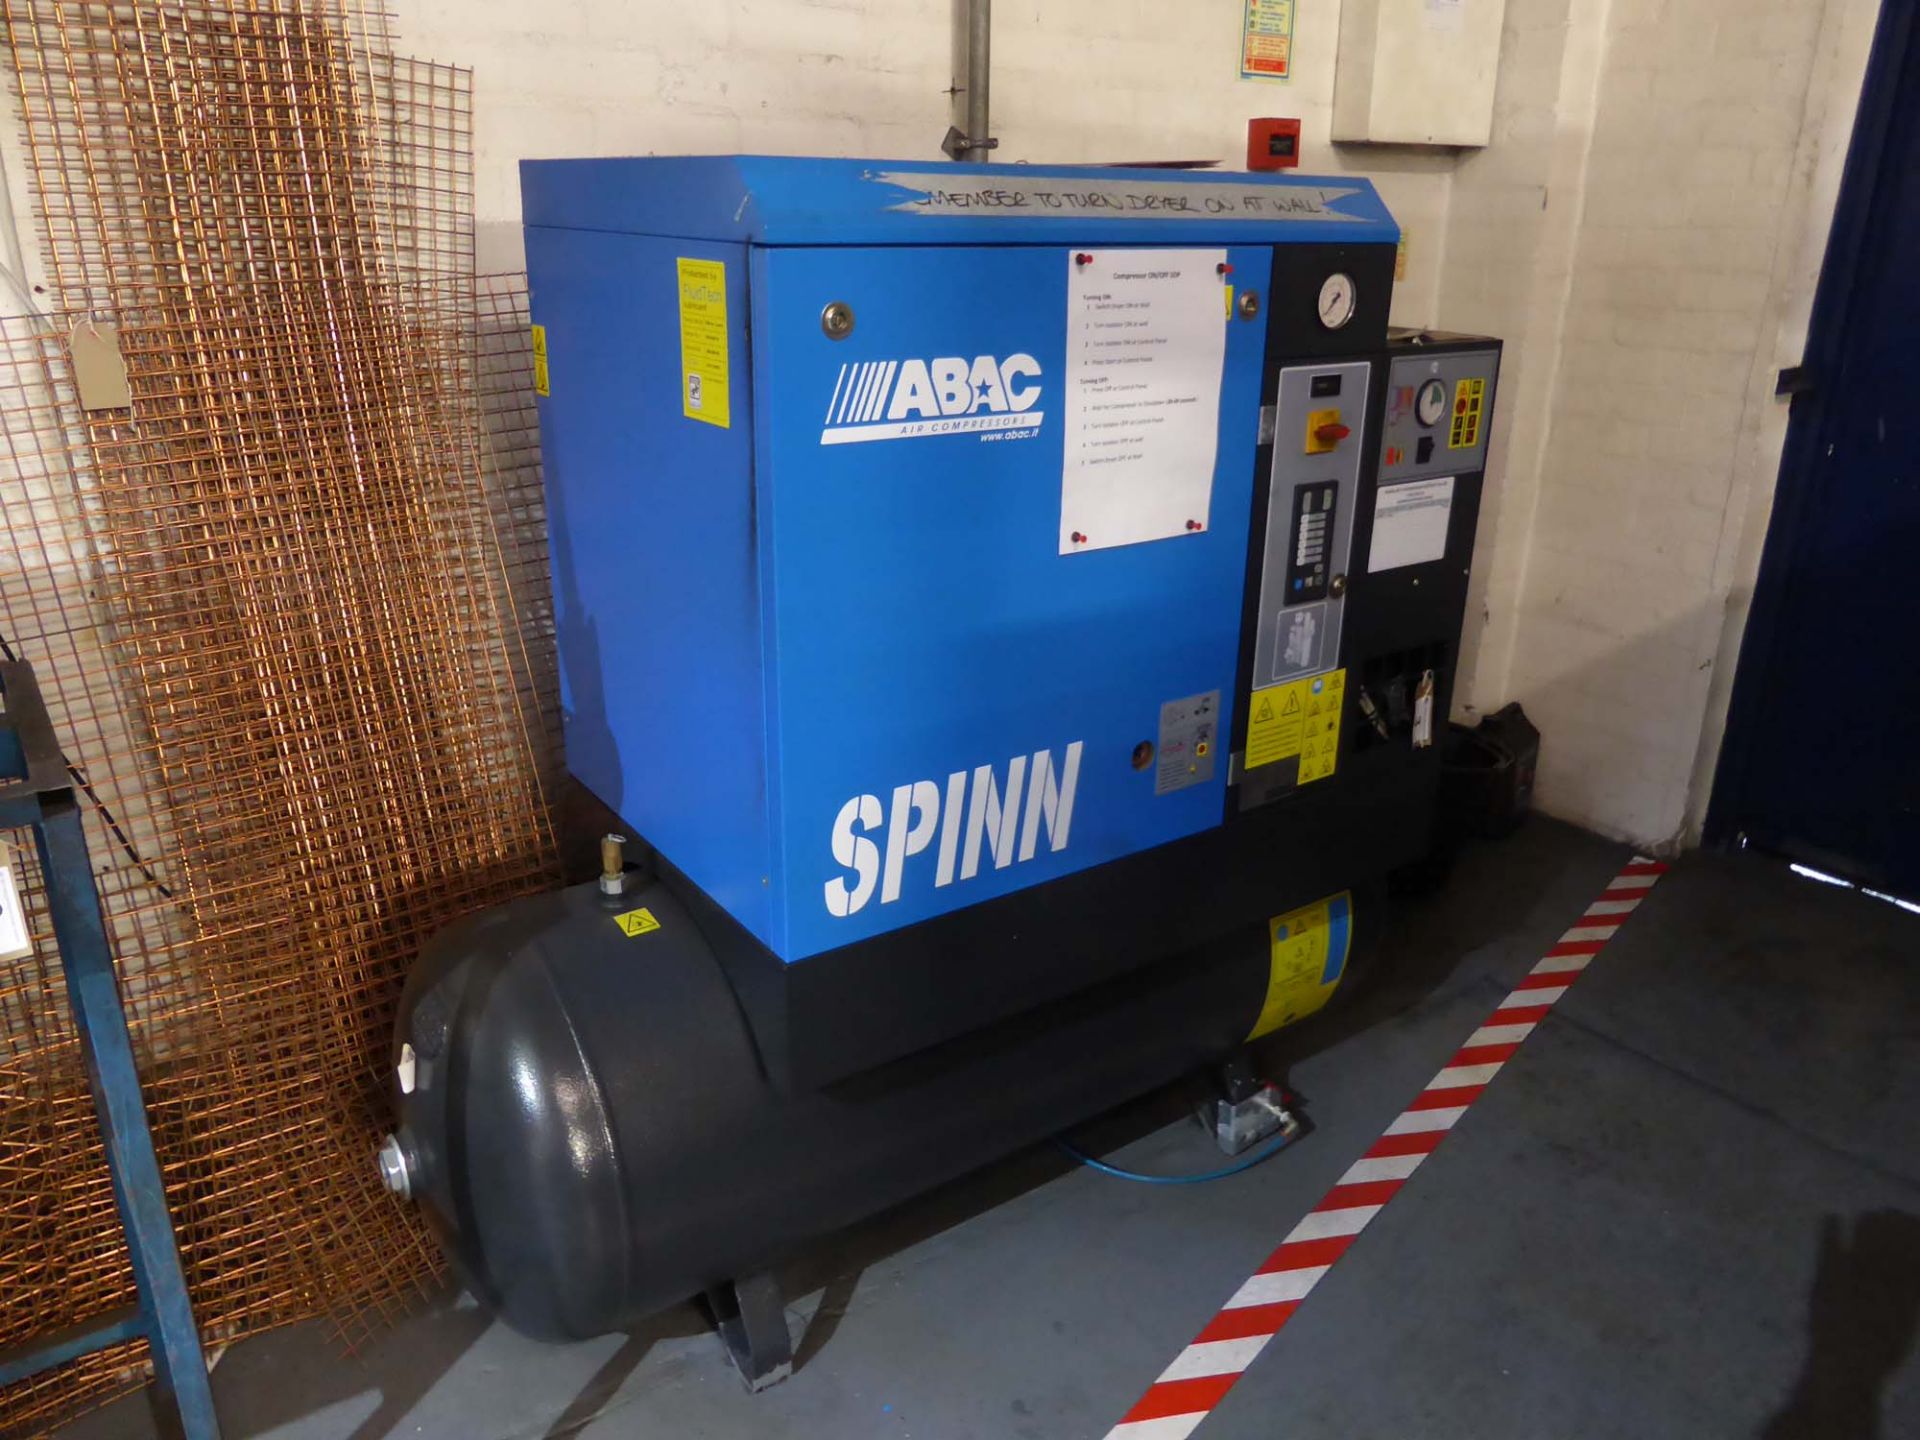 ABAC Spinn packaged receiver mounted air compressor, 10 bar working pressure, year 2016, with